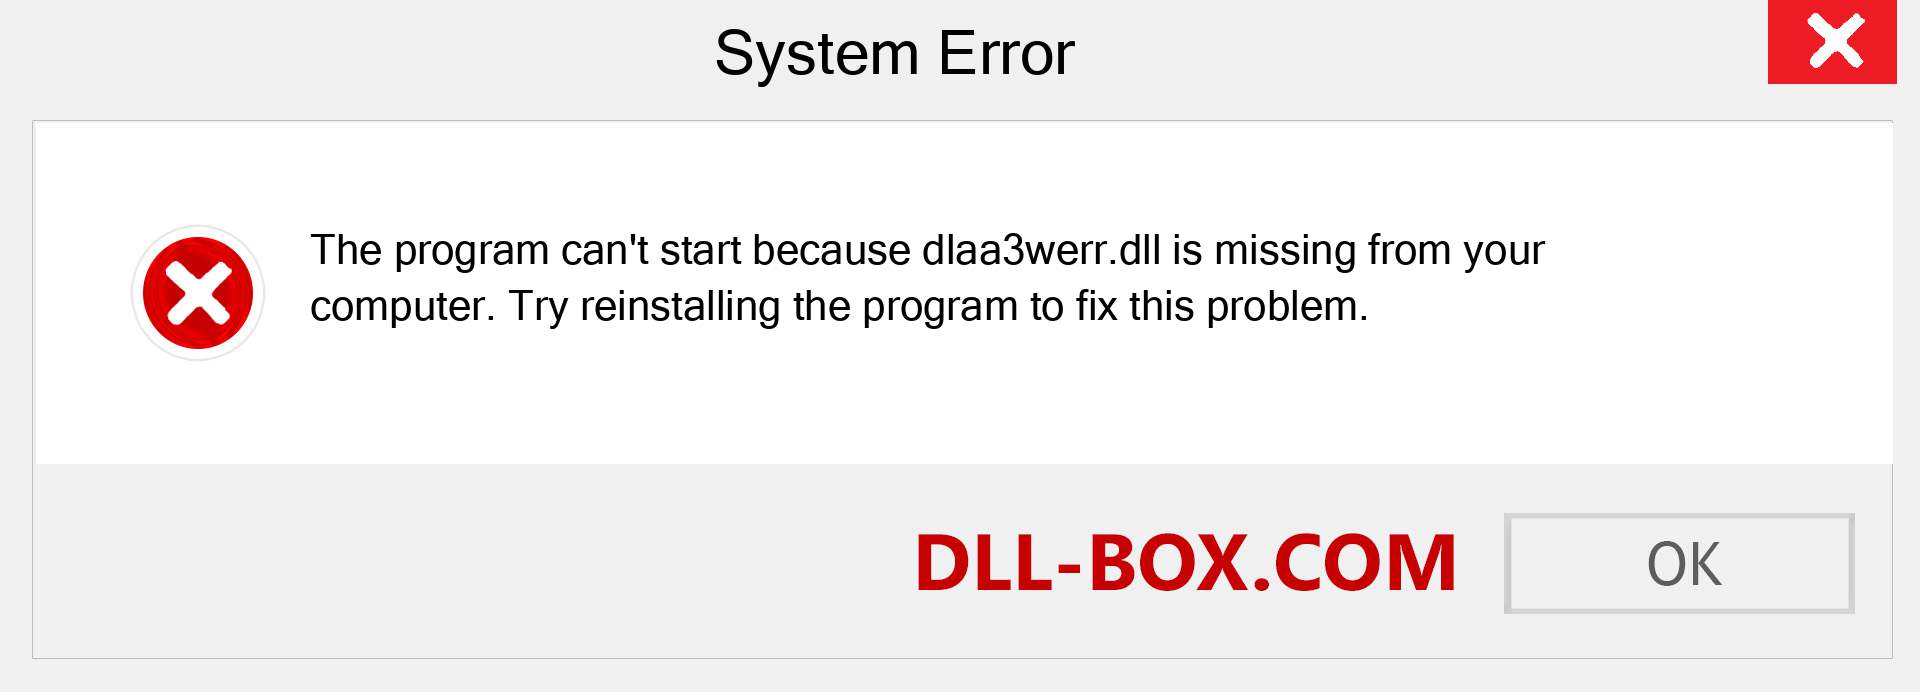  dlaa3werr.dll file is missing?. Download for Windows 7, 8, 10 - Fix  dlaa3werr dll Missing Error on Windows, photos, images